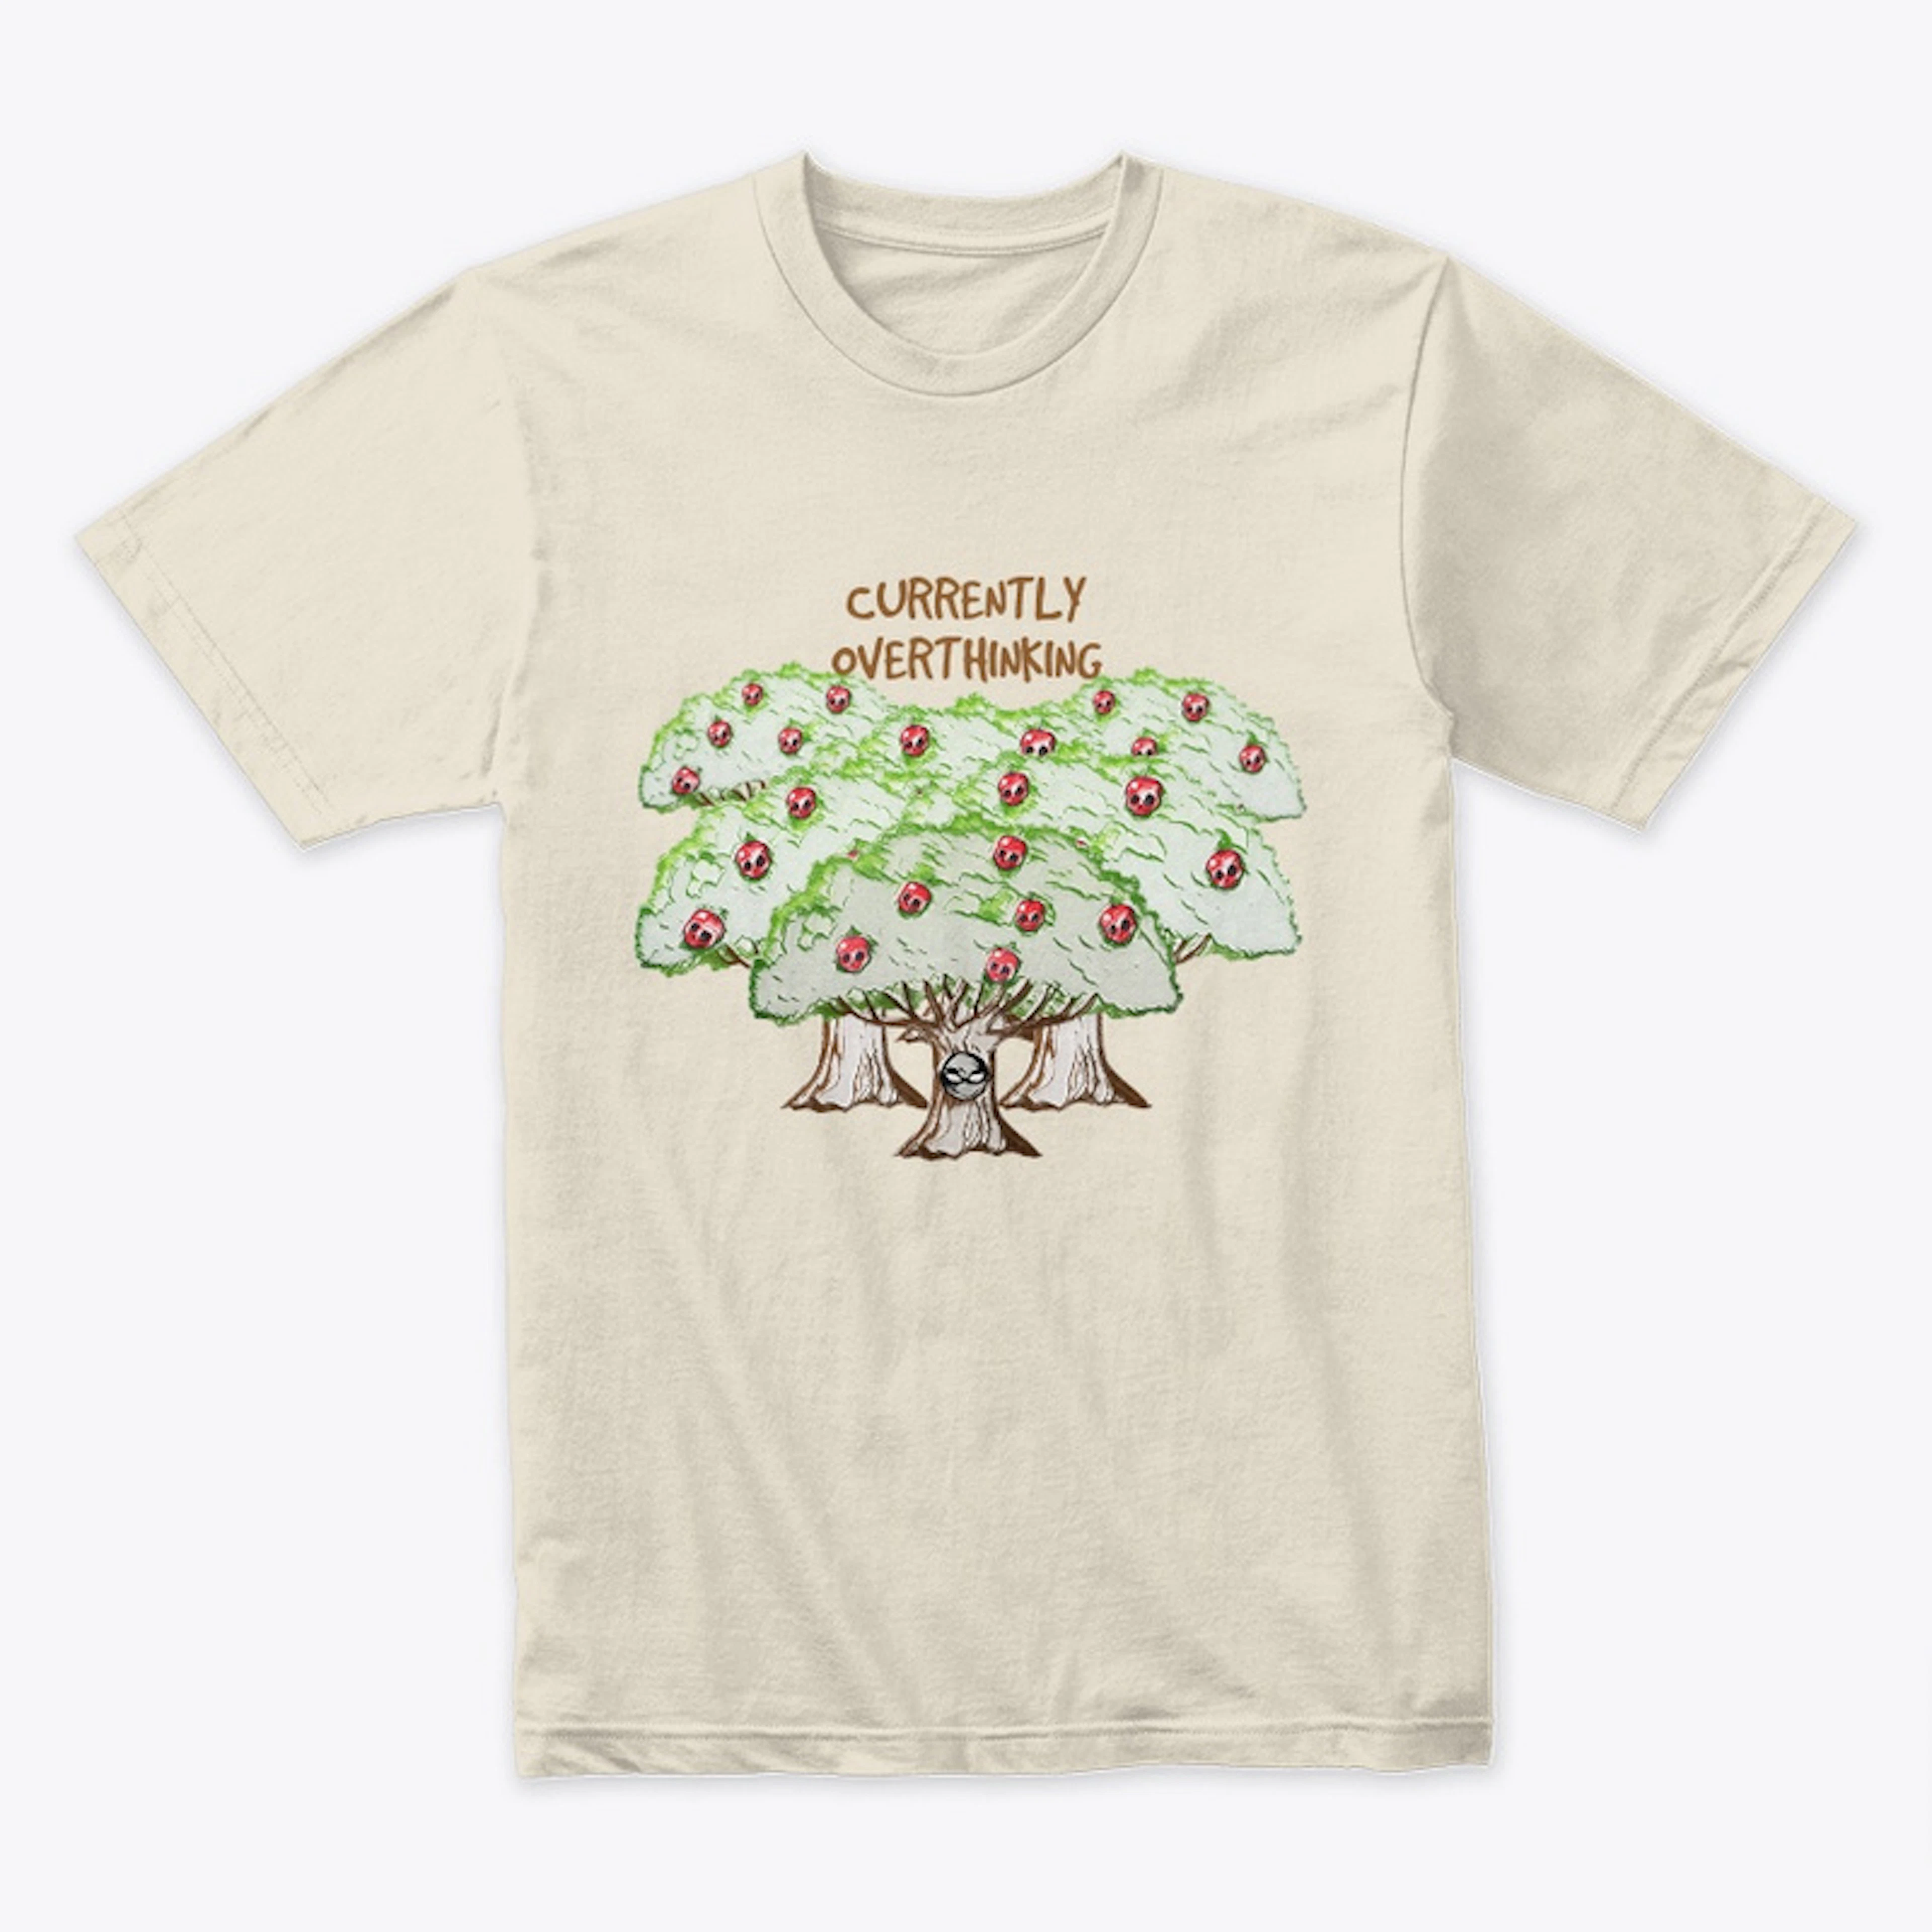 "Weeping Willow" Design.